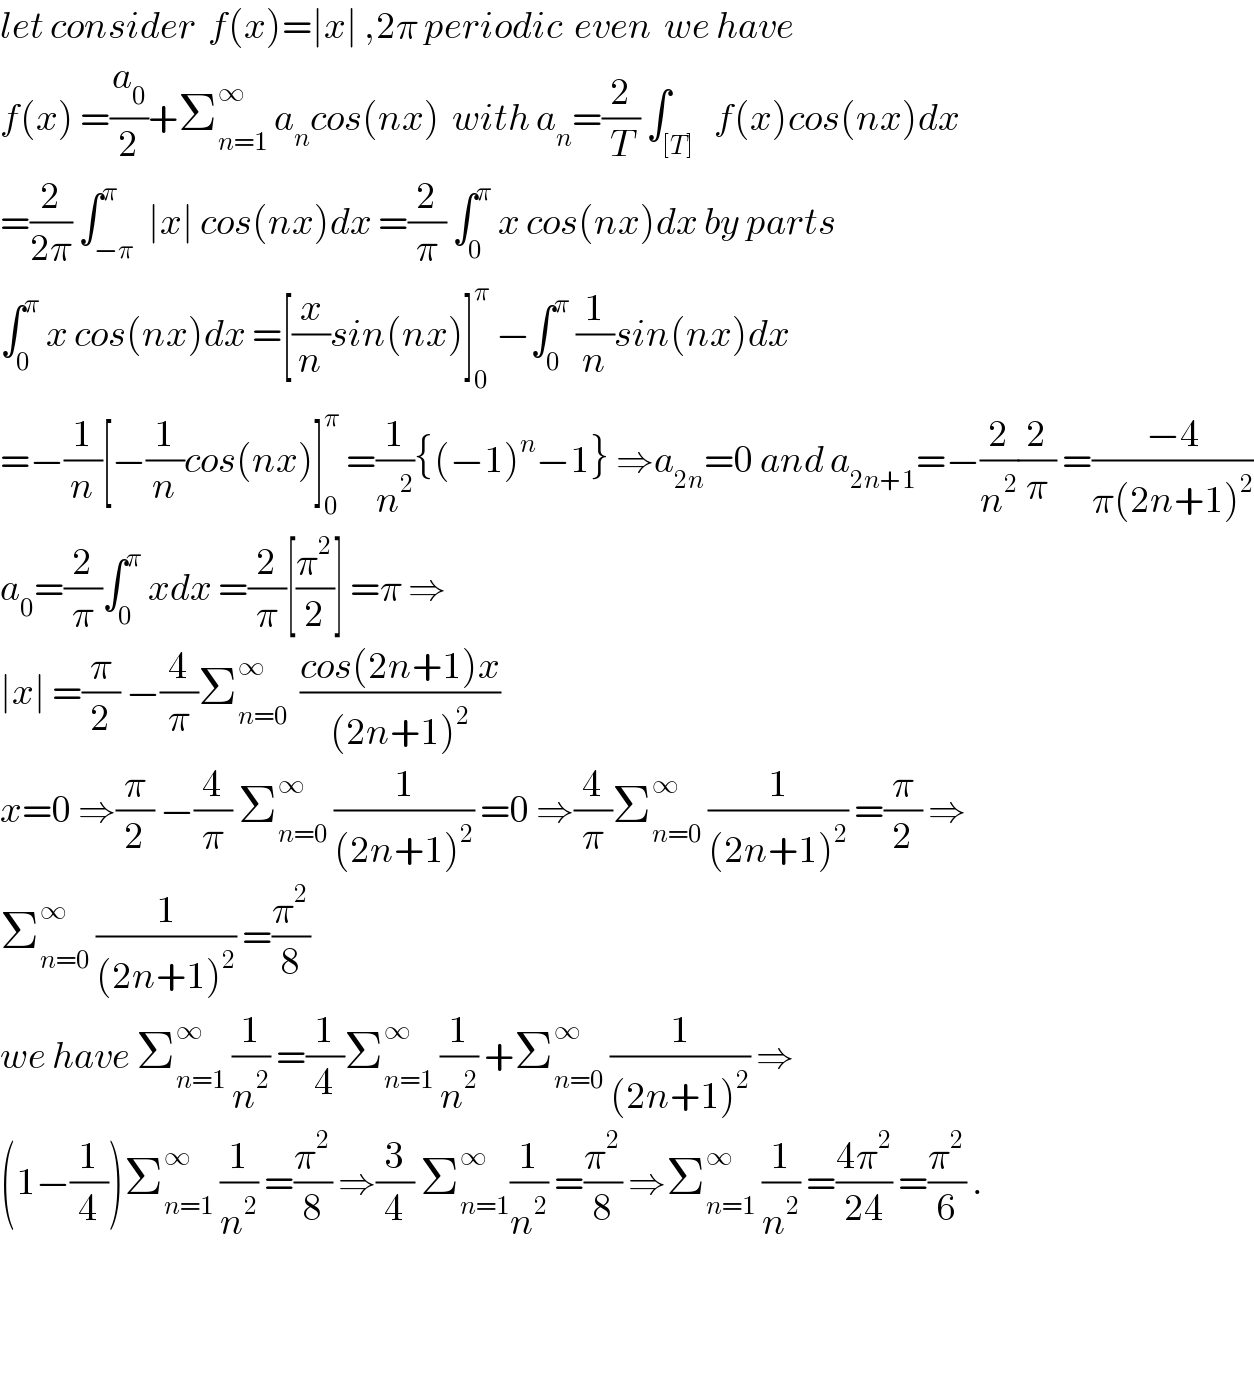 let consider  f(x)=∣x∣ ,2π periodic  even  we have   f(x) =(a_0 /2)+Σ_(n=1) ^∞  a_n cos(nx)  with a_n =(2/T) ∫_([T])   f(x)cos(nx)dx  =(2/(2π)) ∫_(−π) ^π  ∣x∣ cos(nx)dx =(2/π) ∫_0 ^π  x cos(nx)dx by parts  ∫_0 ^π  x cos(nx)dx =[(x/n)sin(nx)]_0 ^π  −∫_0 ^π  (1/n)sin(nx)dx  =−(1/n)[−(1/n)cos(nx)]_0 ^π  =(1/n^2 ){(−1)^n −1} ⇒a_(2n) =0 and a_(2n+1) =−(2/n^2 )(2/π) =((−4)/(π(2n+1)^2 ))  a_0 =(2/π)∫_0 ^π  xdx =(2/π)[(π^2 /2)] =π ⇒  ∣x∣ =(π/2) −(4/π)Σ_(n=0) ^∞   ((cos(2n+1)x)/((2n+1)^2 ))  x=0 ⇒(π/2) −(4/π) Σ_(n=0) ^∞  (1/((2n+1)^2 )) =0 ⇒(4/π)Σ_(n=0) ^∞  (1/((2n+1)^2 )) =(π/2) ⇒  Σ_(n=0) ^∞  (1/((2n+1)^2 )) =(π^2 /8)  we have Σ_(n=1) ^∞  (1/n^2 ) =(1/4)Σ_(n=1) ^∞  (1/n^2 ) +Σ_(n=0) ^∞  (1/((2n+1)^2 )) ⇒  (1−(1/4))Σ_(n=1) ^∞  (1/n^2 ) =(π^2 /8) ⇒(3/4) Σ_(n=1) ^∞ (1/n^2 ) =(π^2 /8) ⇒Σ_(n=1) ^∞  (1/n^2 ) =((4π^2 )/(24)) =(π^2 /6) .      